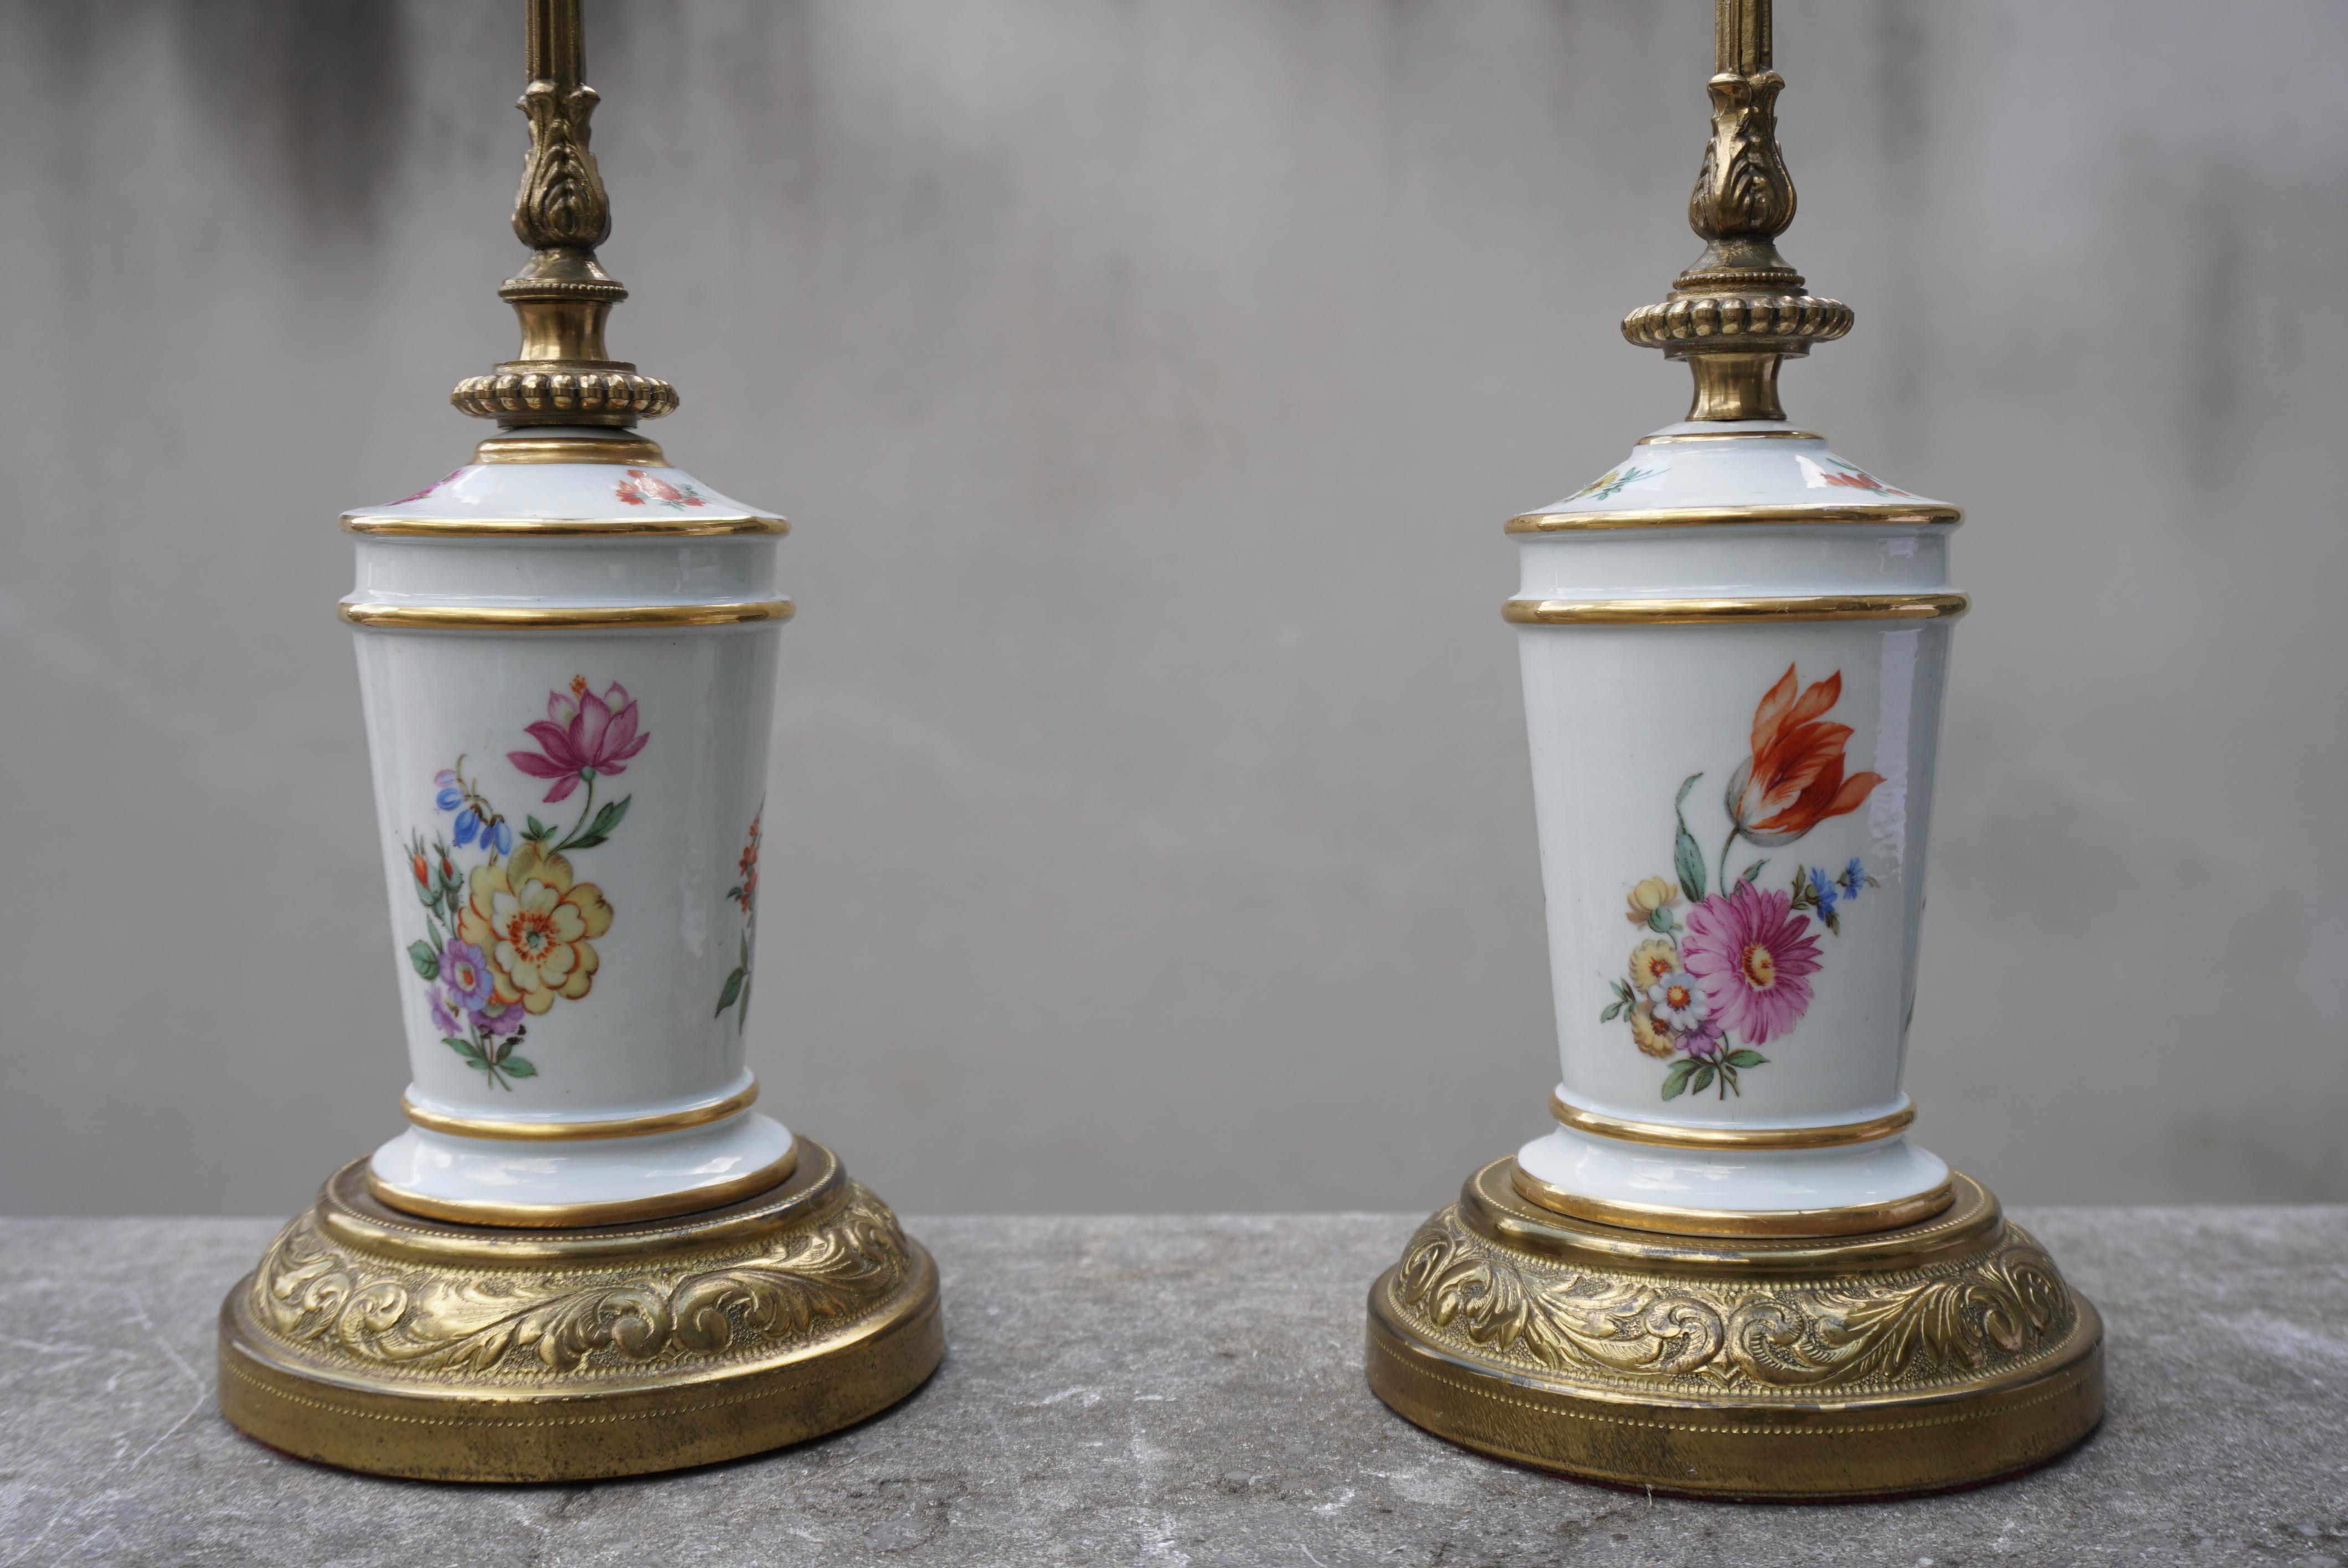 A pair porcelain brass and porcelain table lamps with flower decoration.

Height 13.7